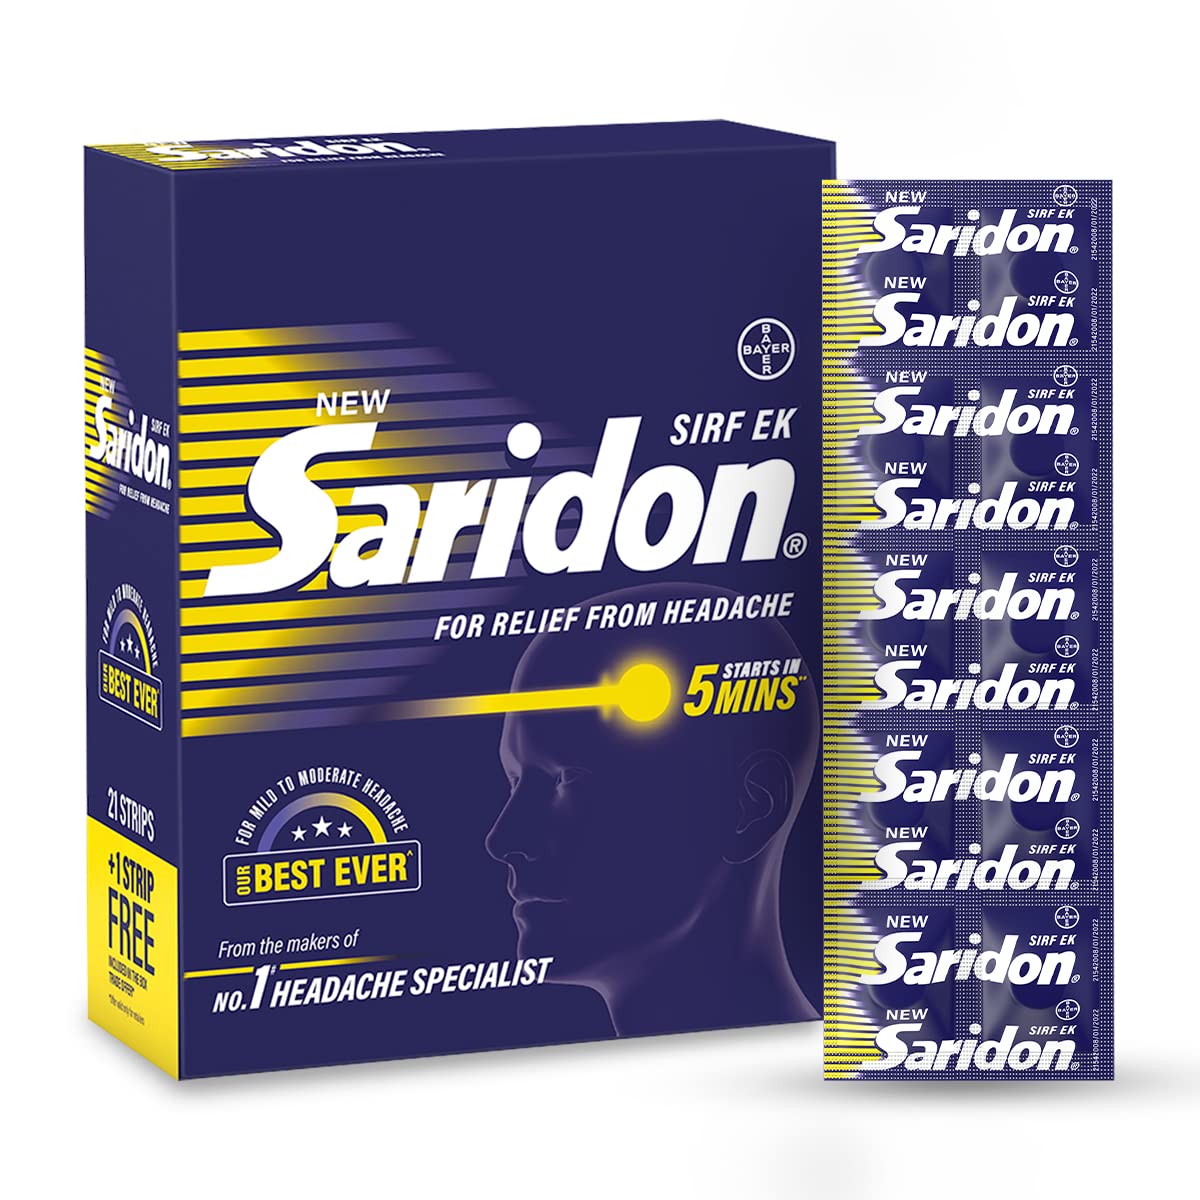 Buy New Saridon for Fast Headache Relief, 10 Tablets Online